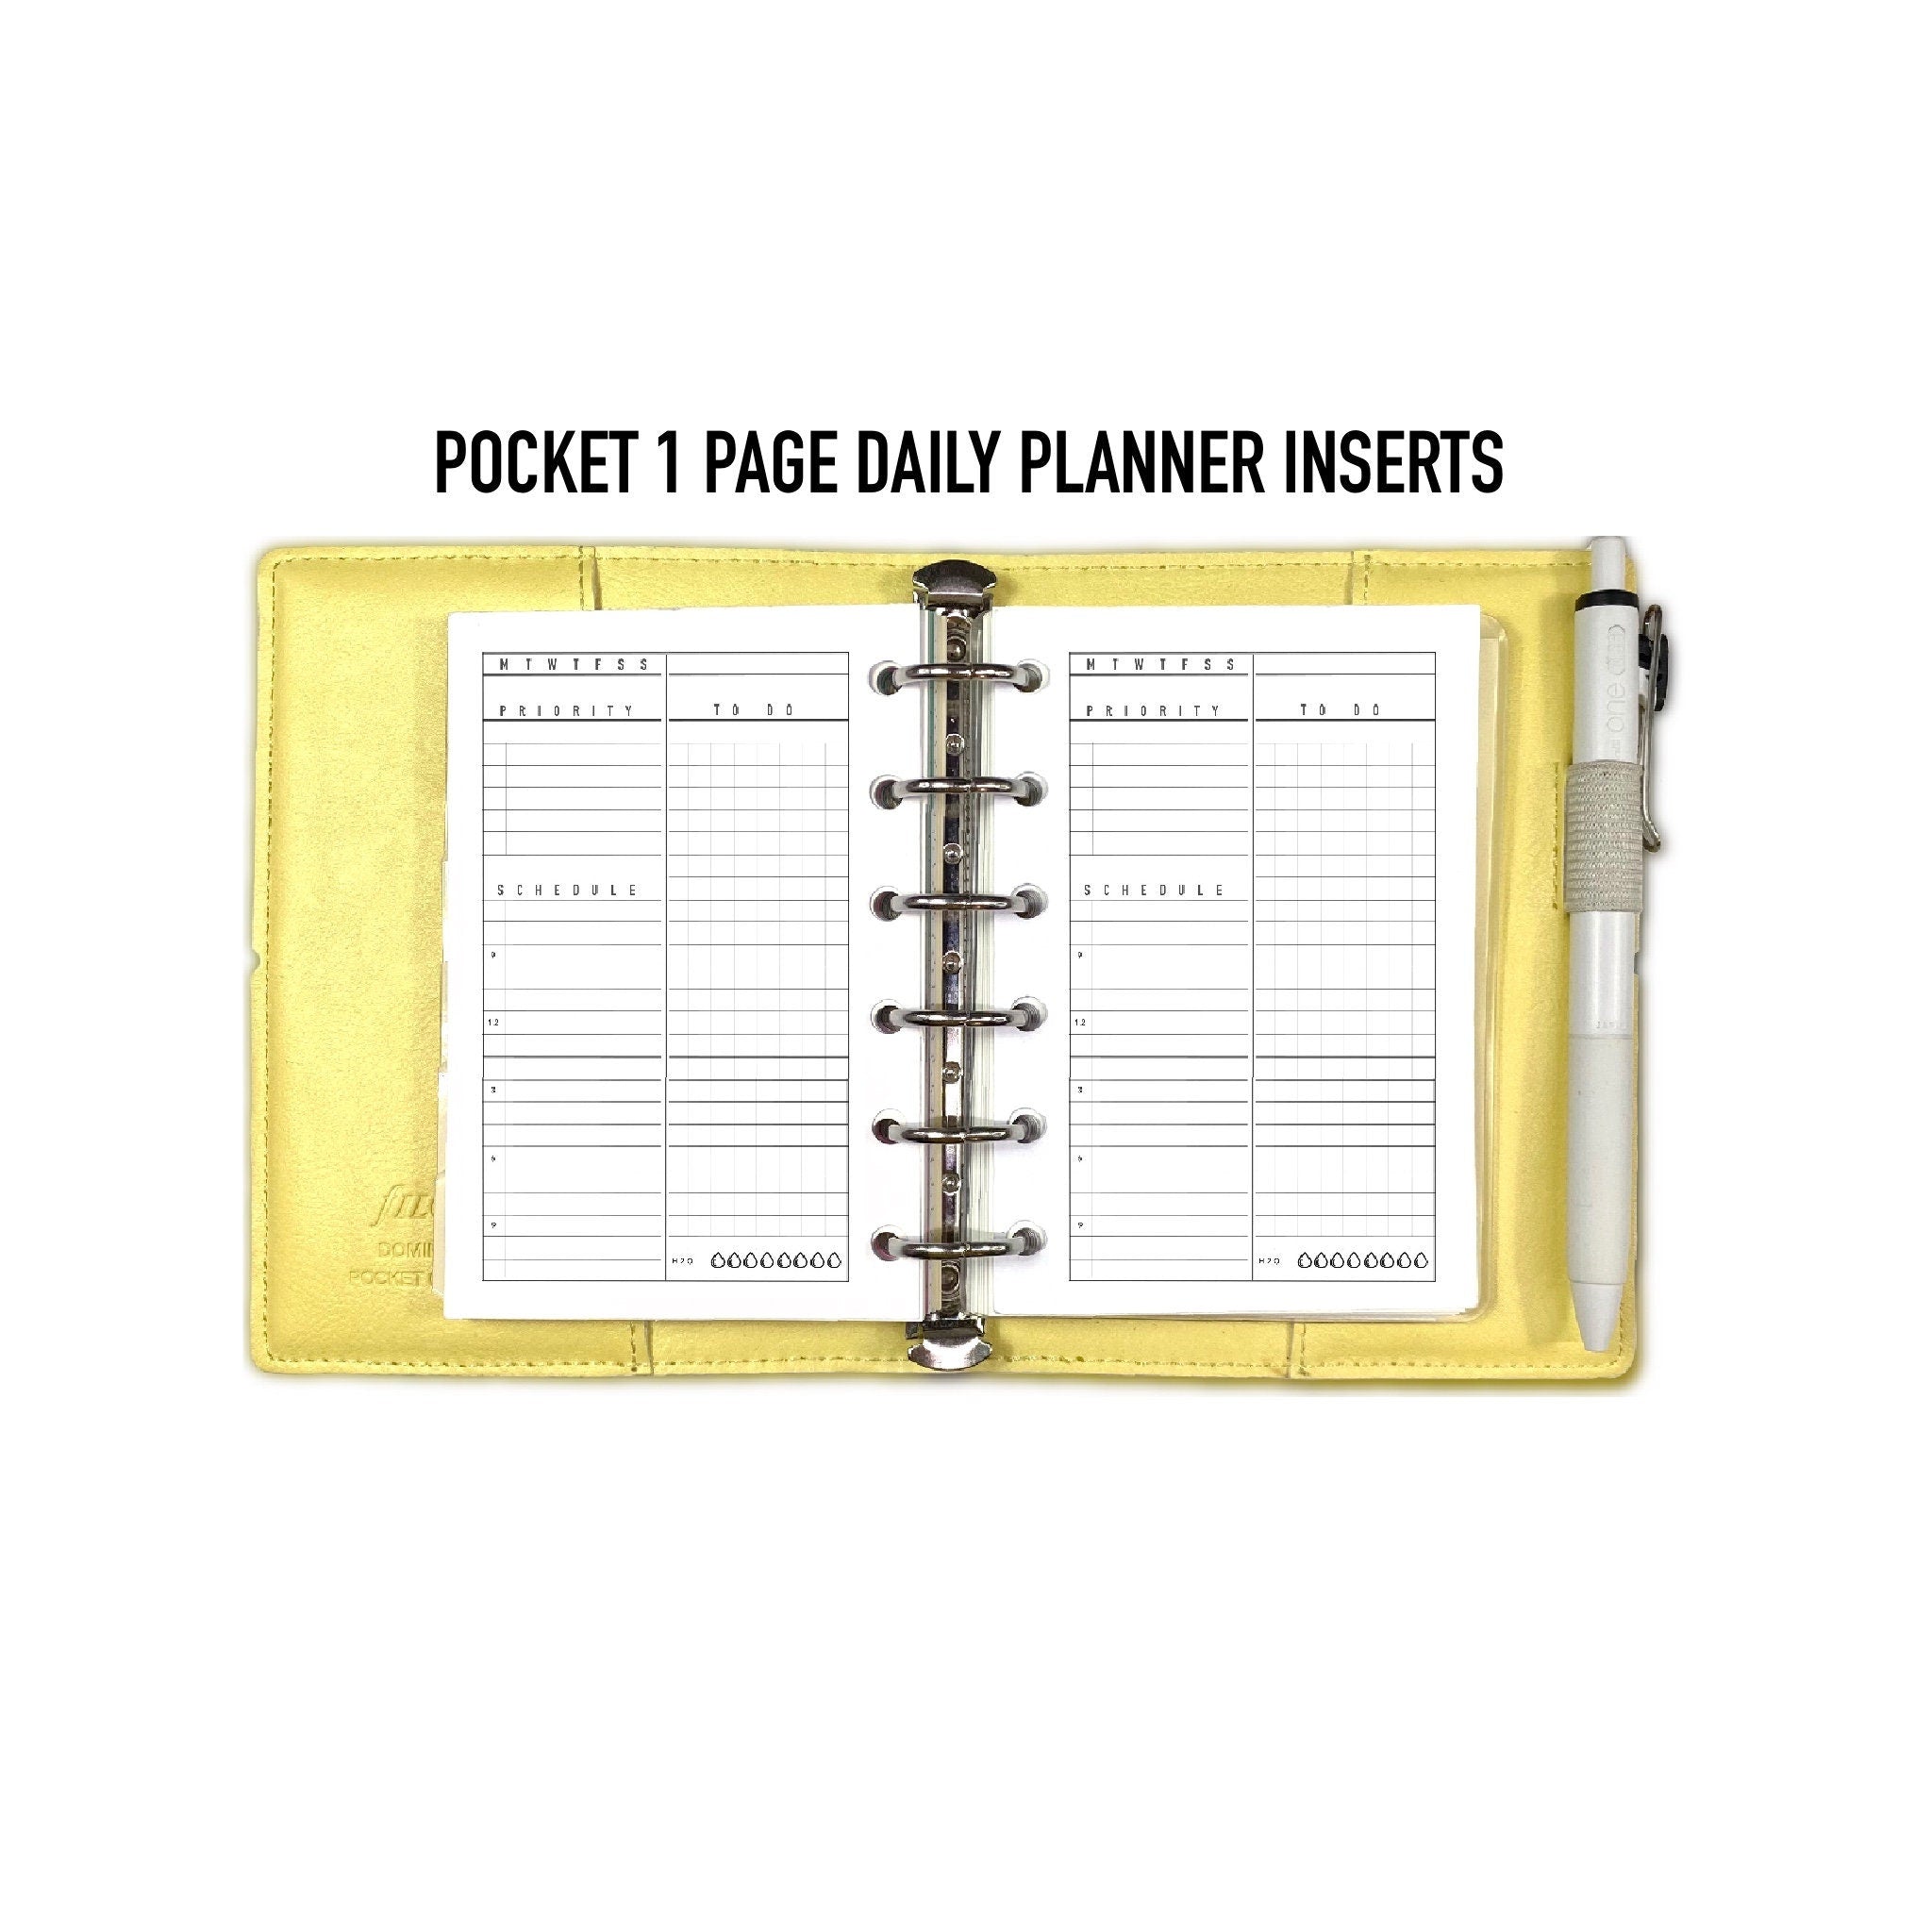 Daily Planner Printable, Daily Agenda, Daily Organizer, Planner Inserts,  Printable Planner, Planner Pages, Best Planner, Filofax A5, A4, Letter Size  –